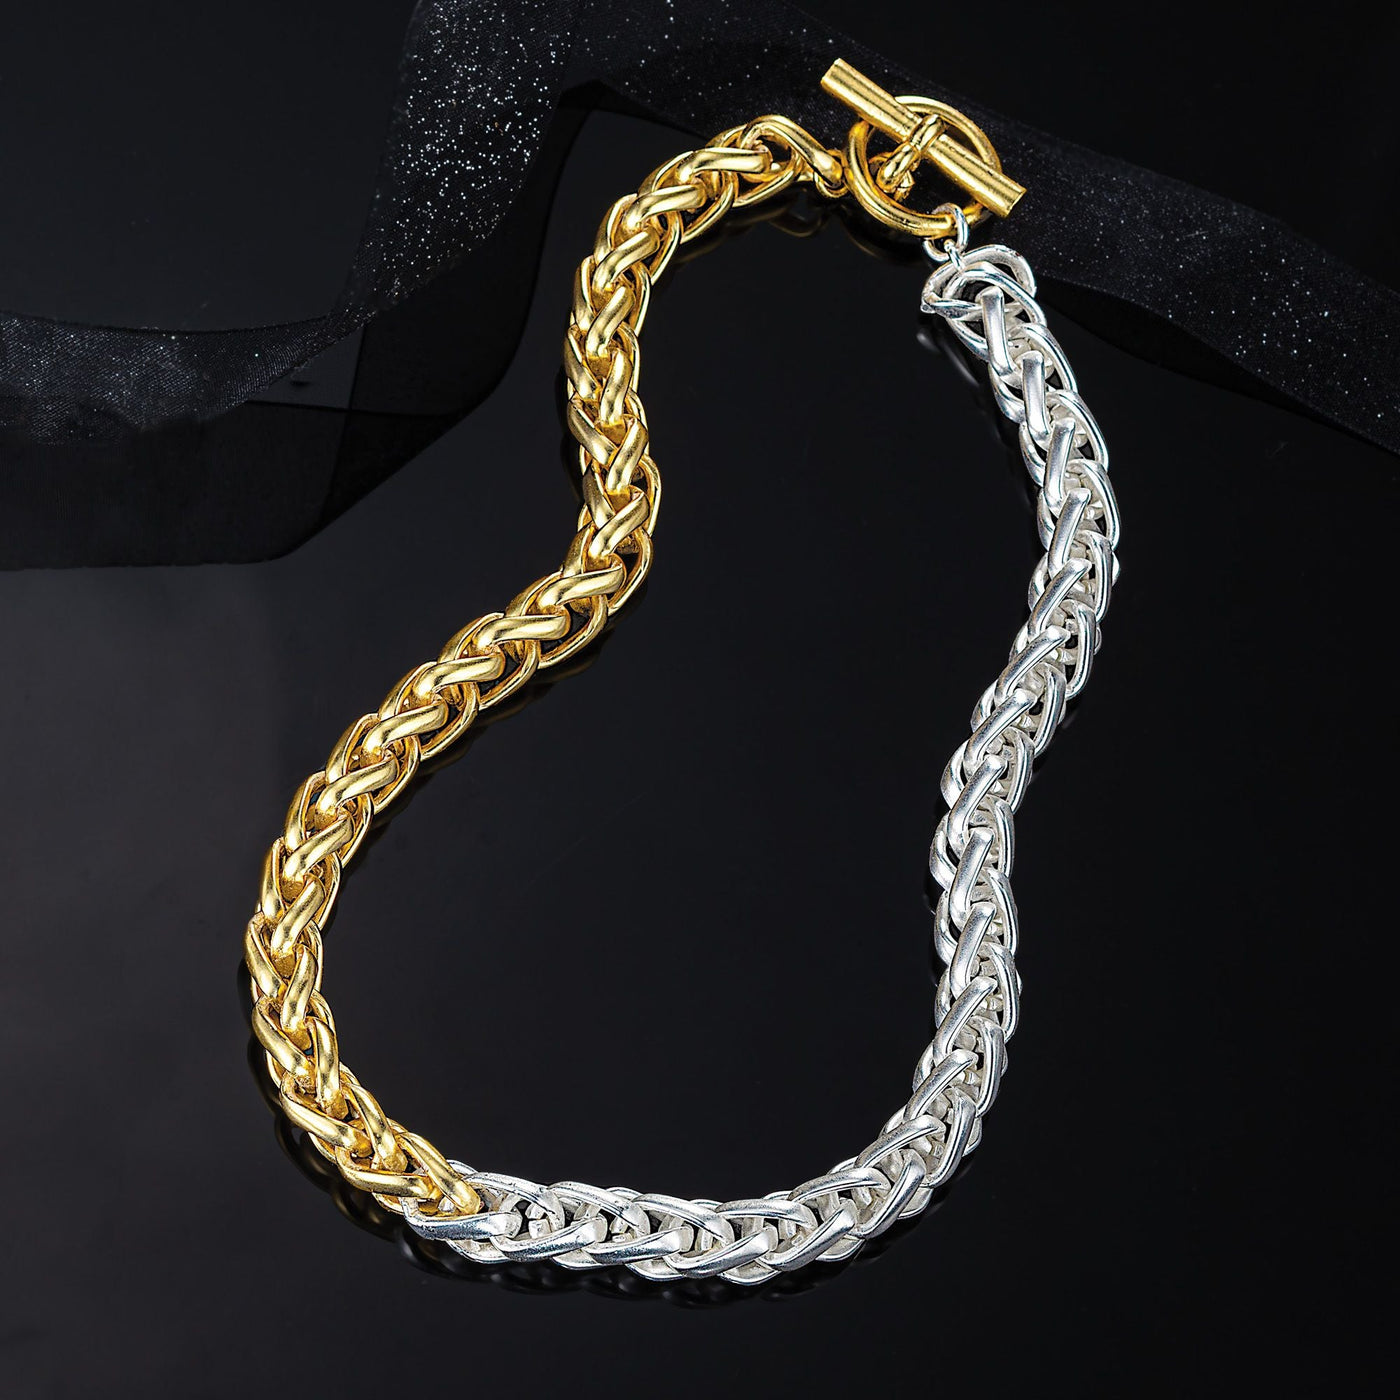 Silver & Gold Braided Necklace